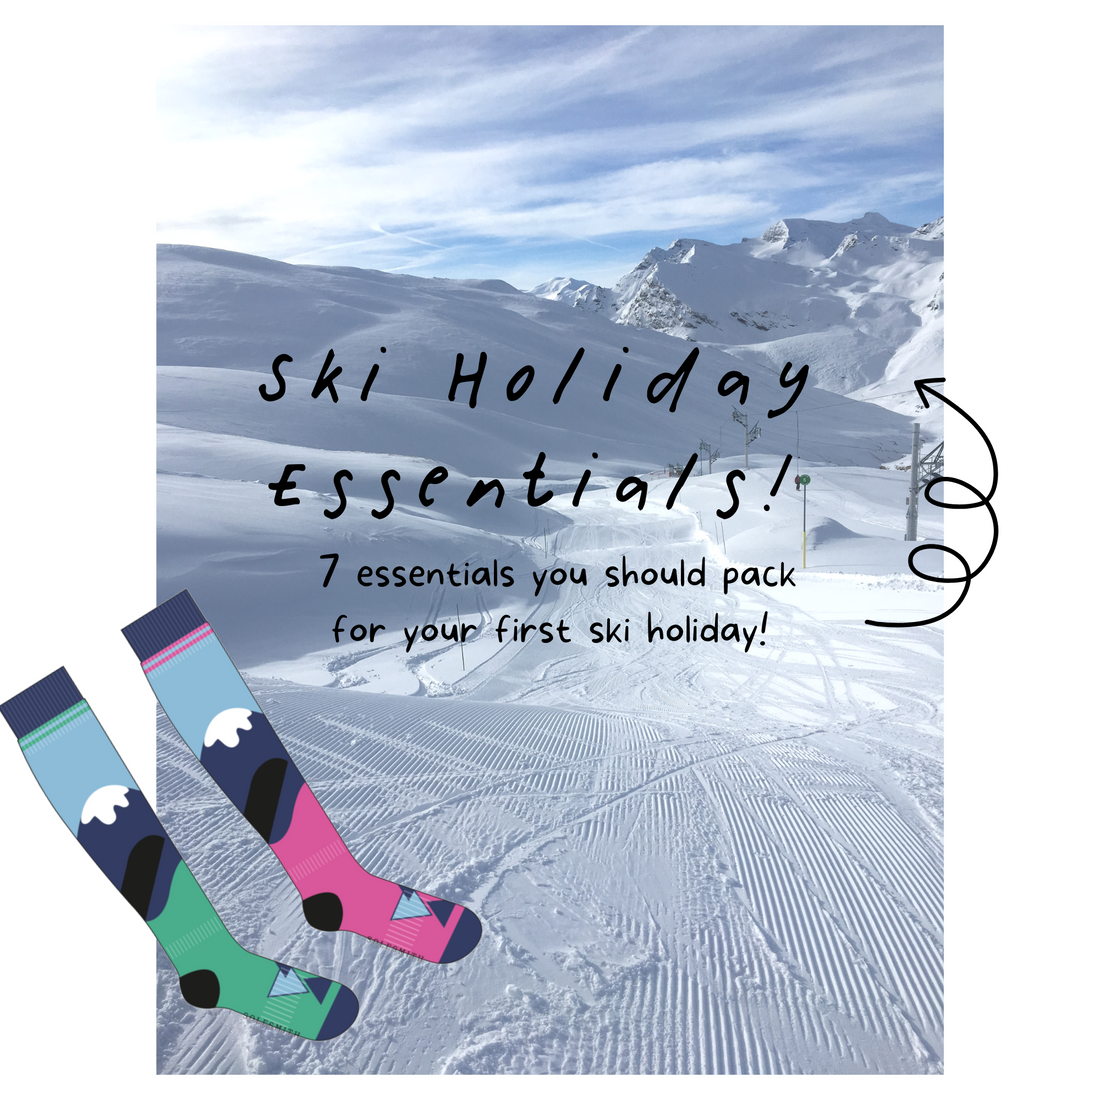 Our top 7 essentials you should pack for your first ski holiday!